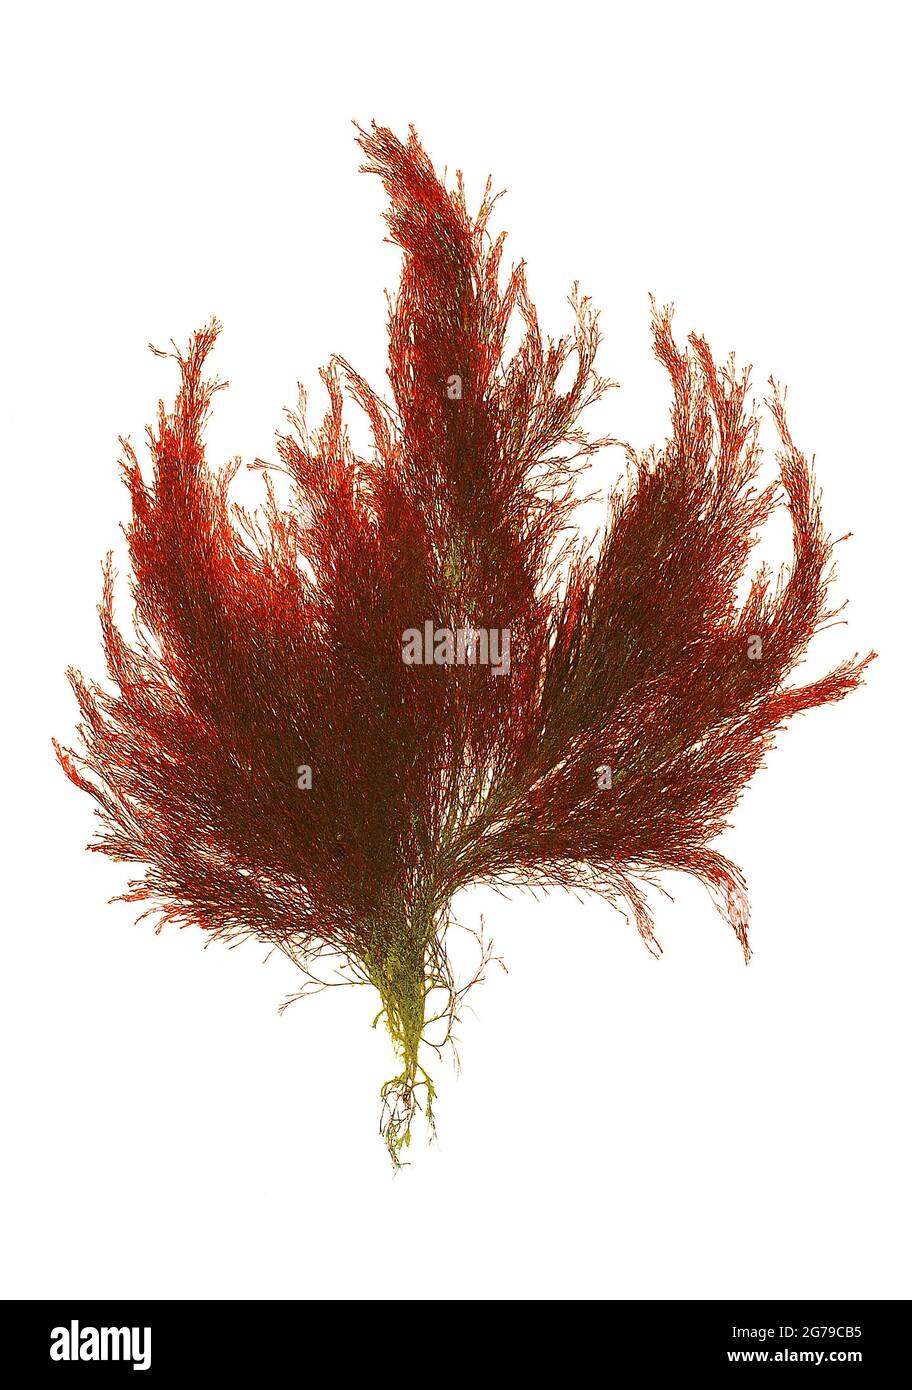 Polysiphonia stricta (Dillwyn) Greville, red alga (Florideophyceae) Stock Photo